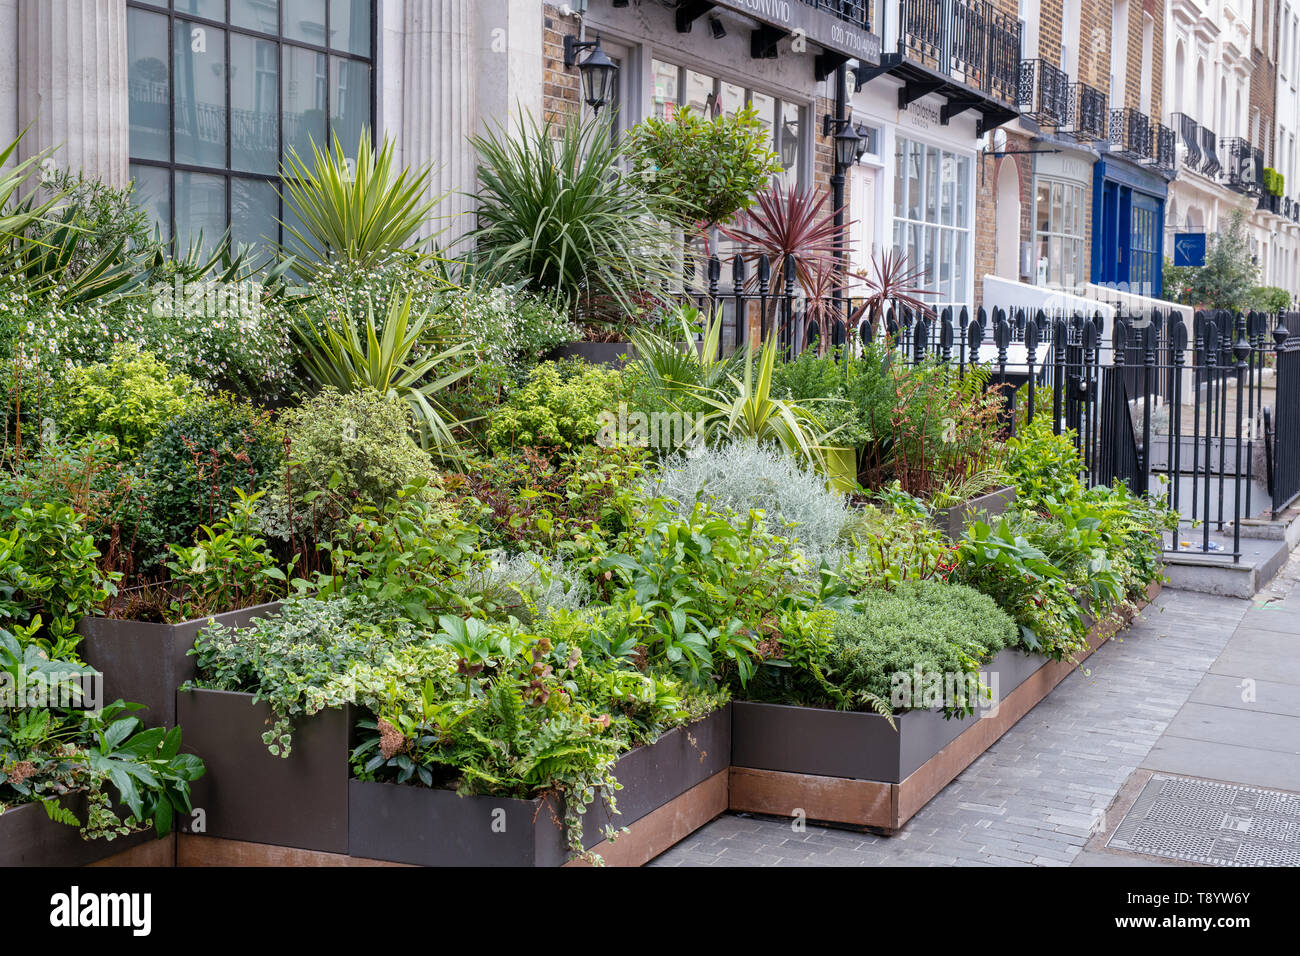 Small trees and shrubs in containers outside houses in Ebury Srteet, Belgravia, London, England Stock Photo